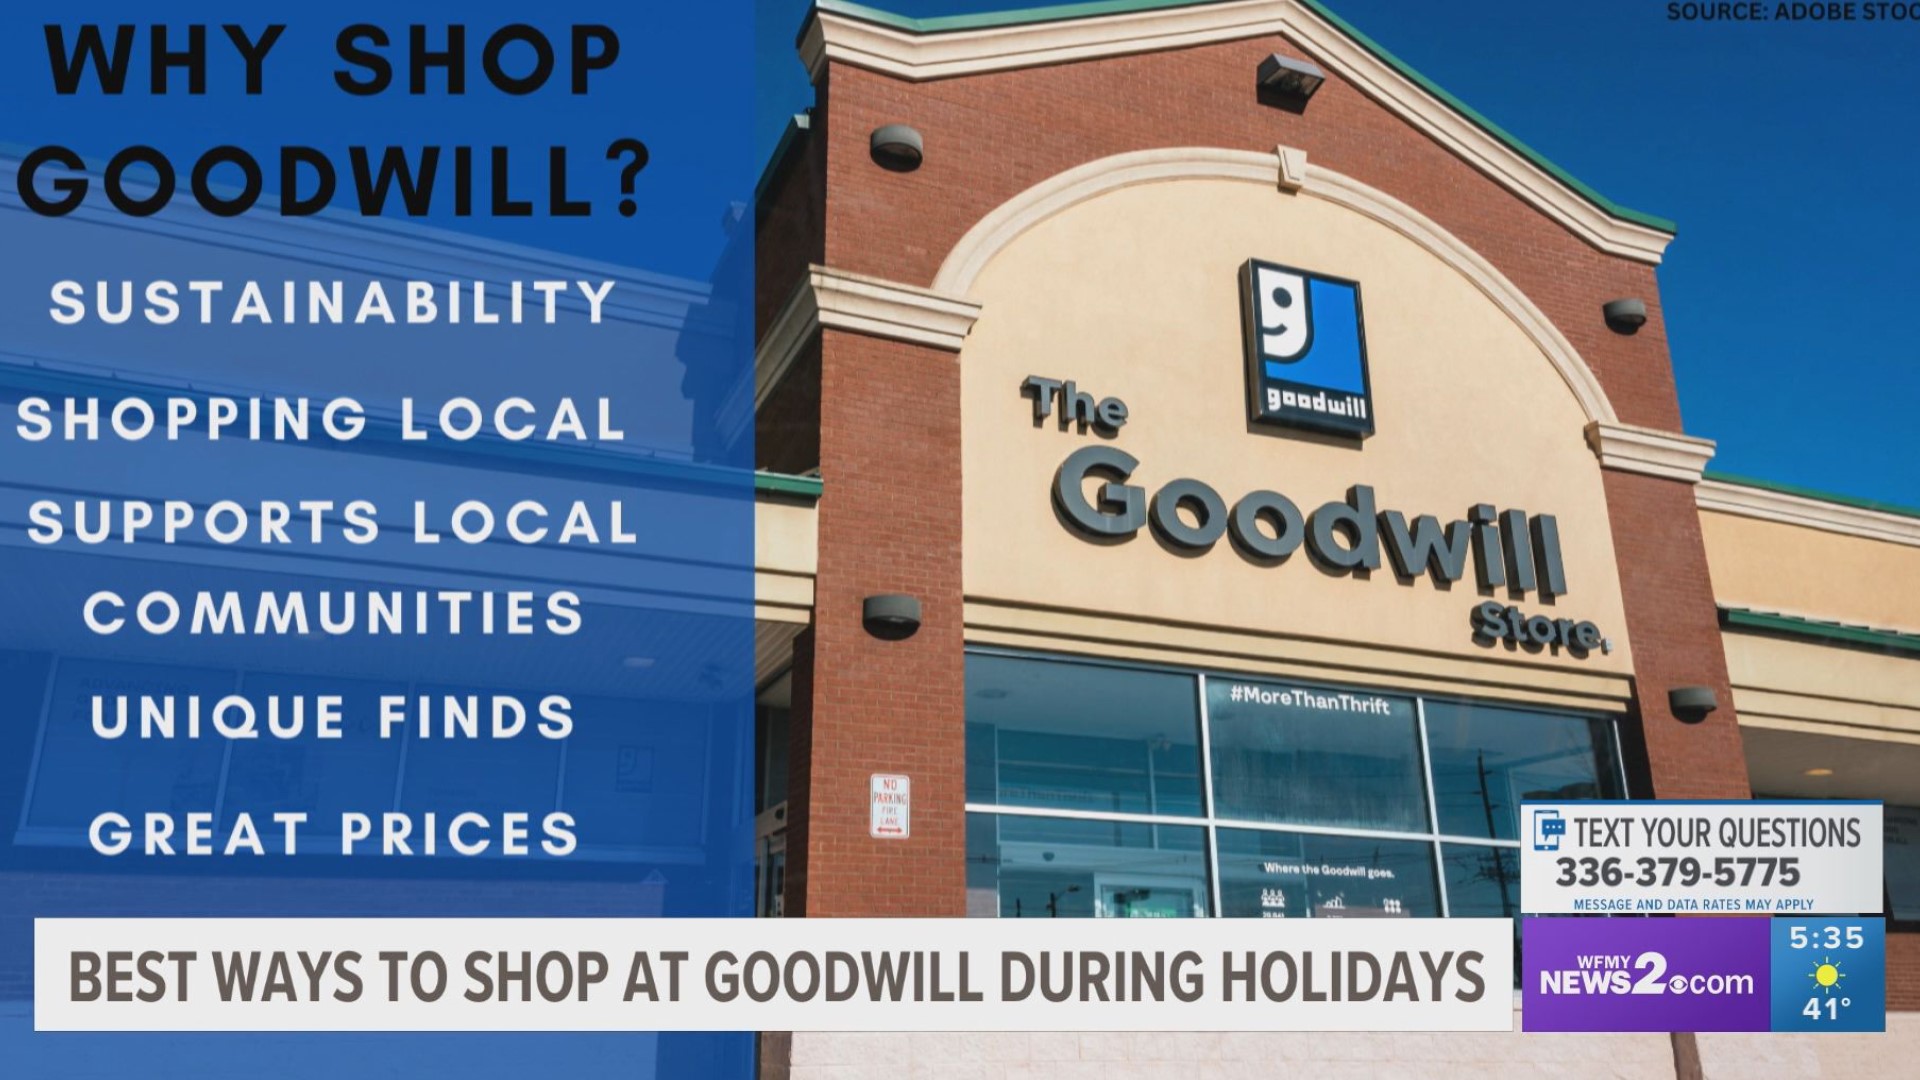 Goodwill associates explain the best ways to find cheap unique gifts during the holidays and how to properly donate to Goodwill.